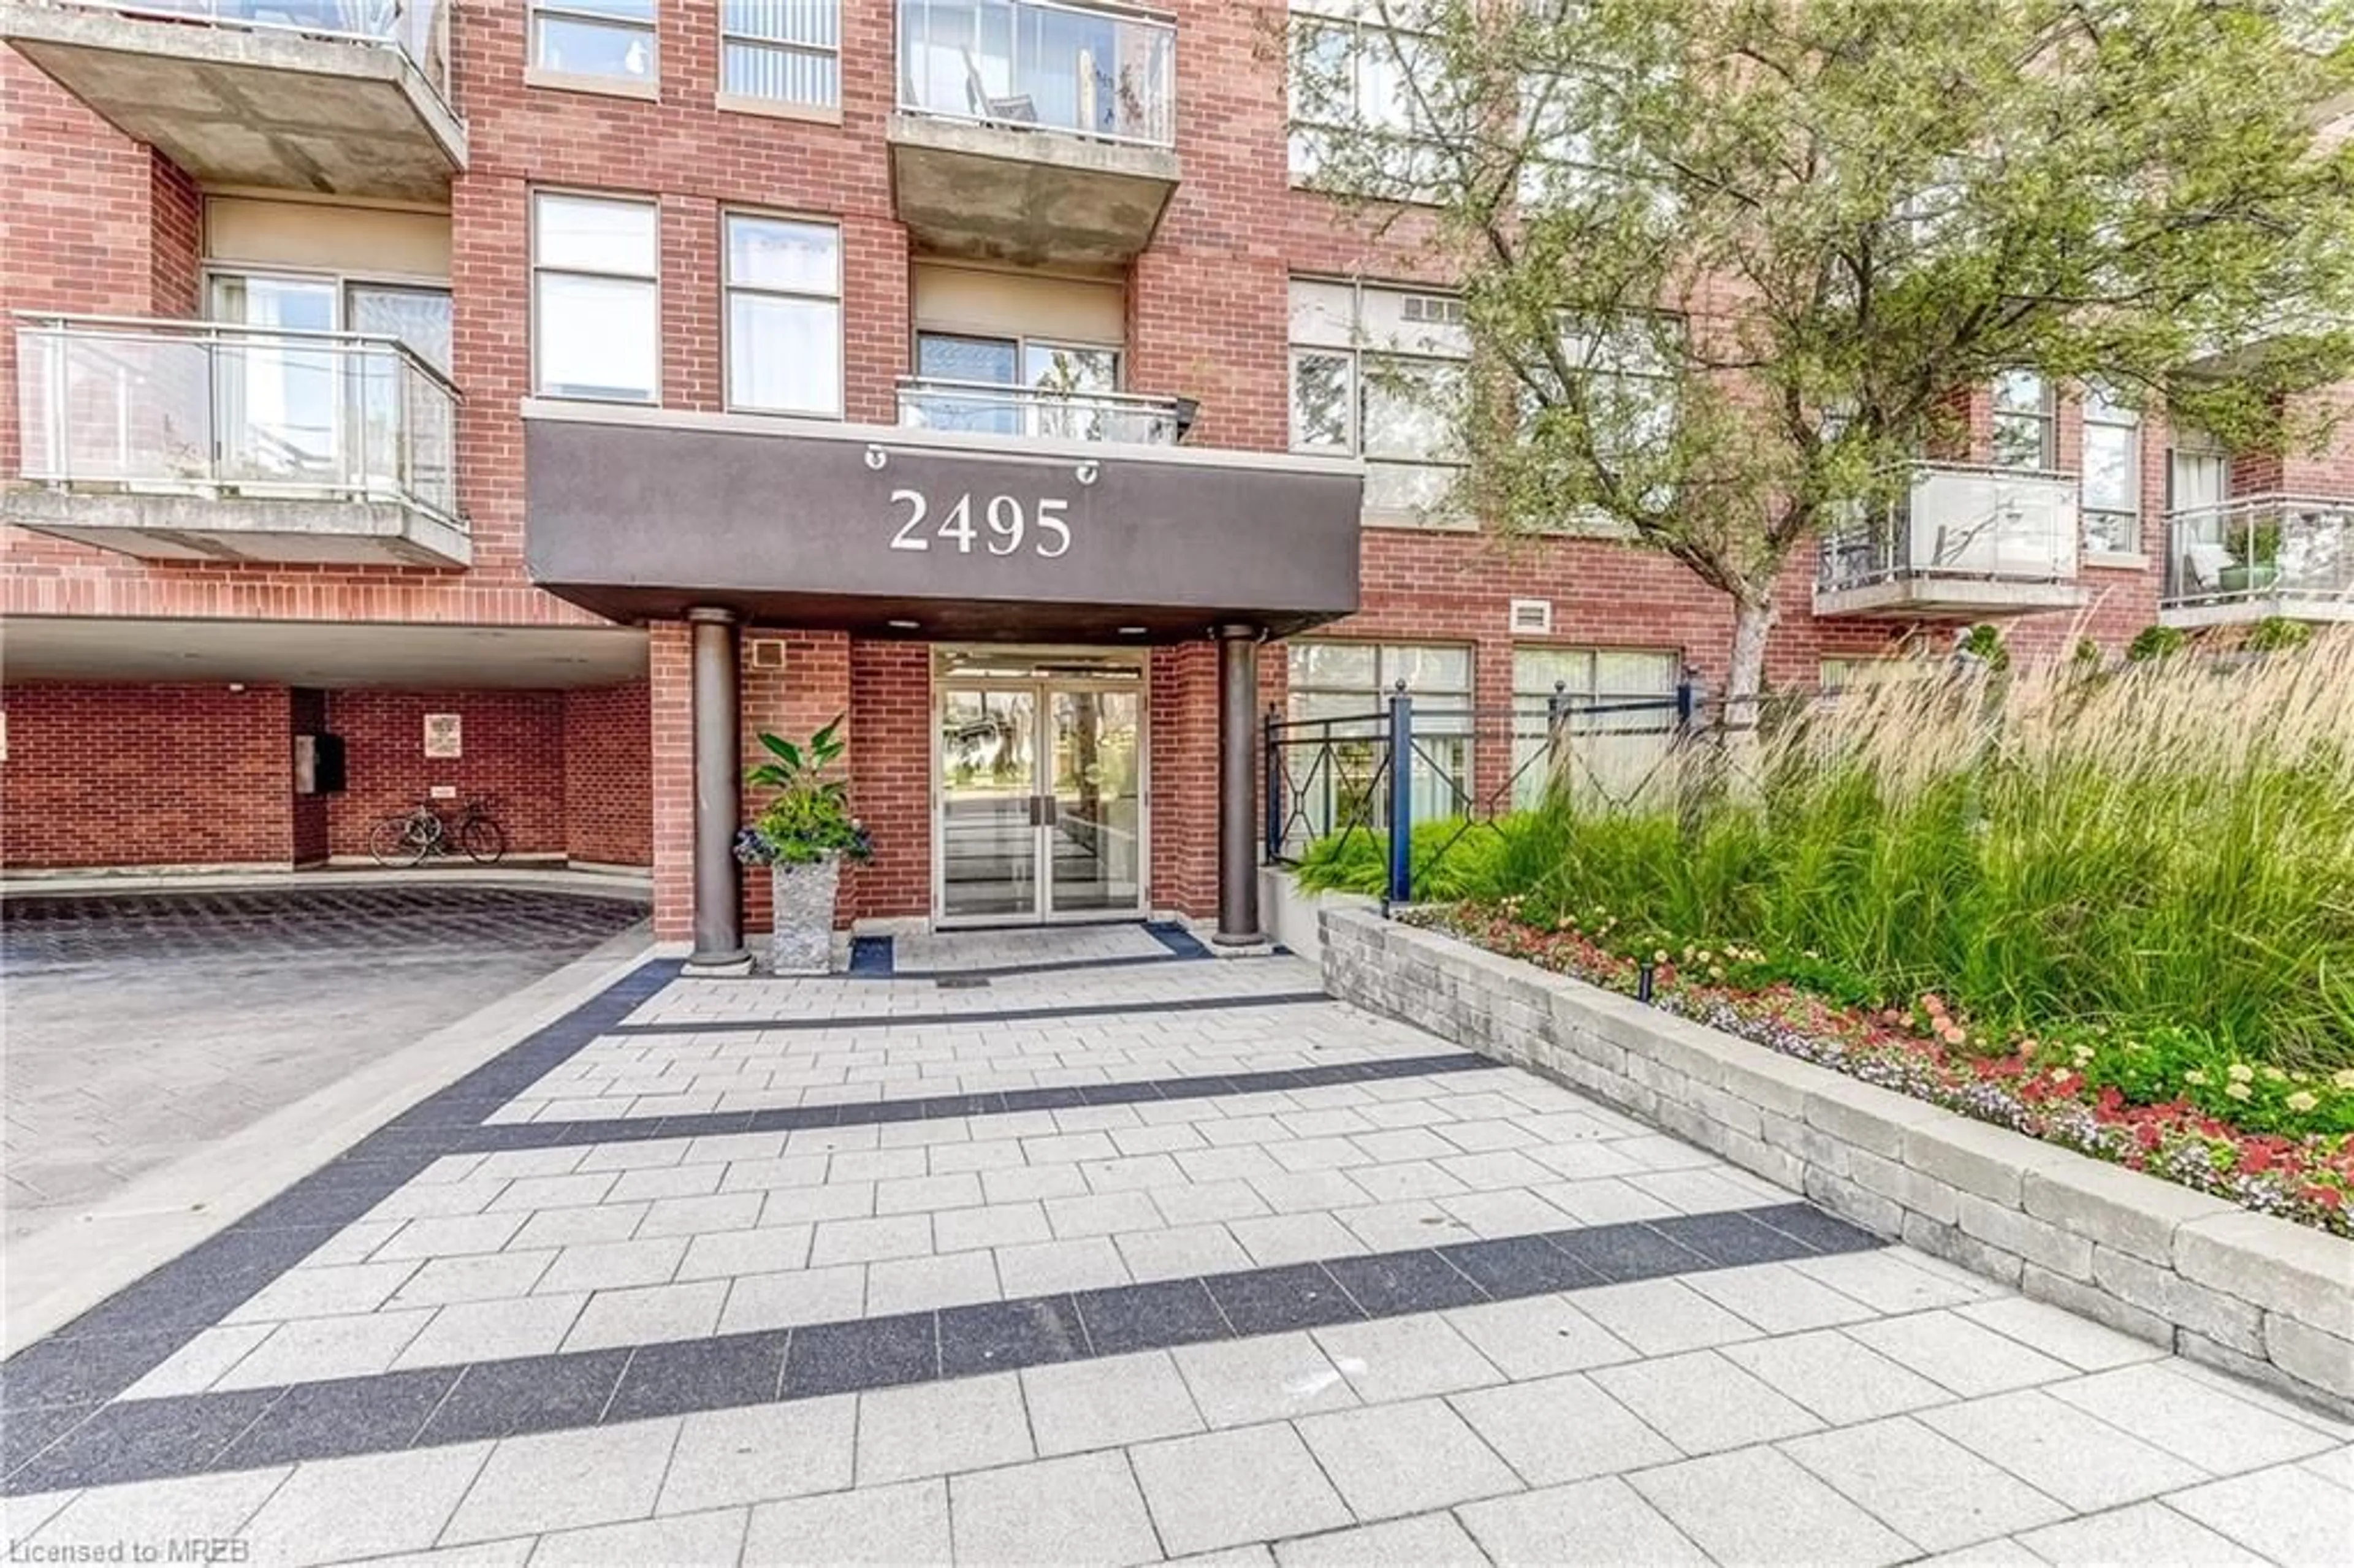 A pic from exterior of the house or condo for 2495 Dundas St #611, Toronto Ontario M6P 1X4